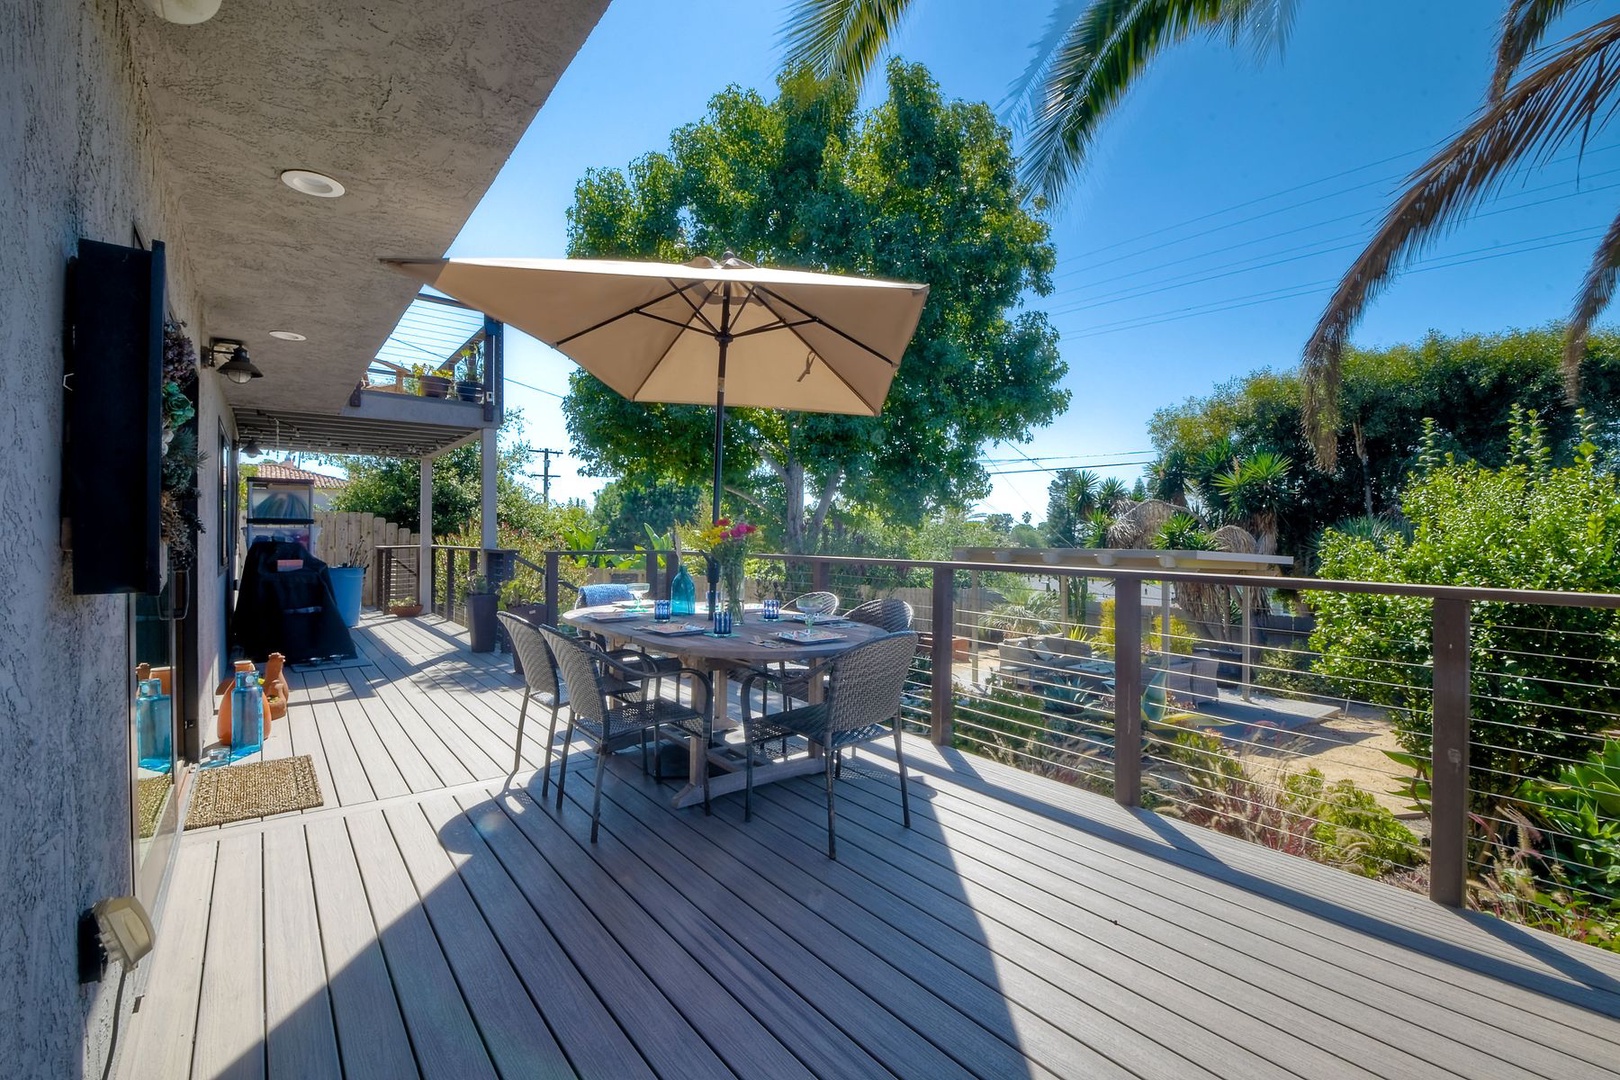 Relax in the sunshine or dine al fresco on the back deck